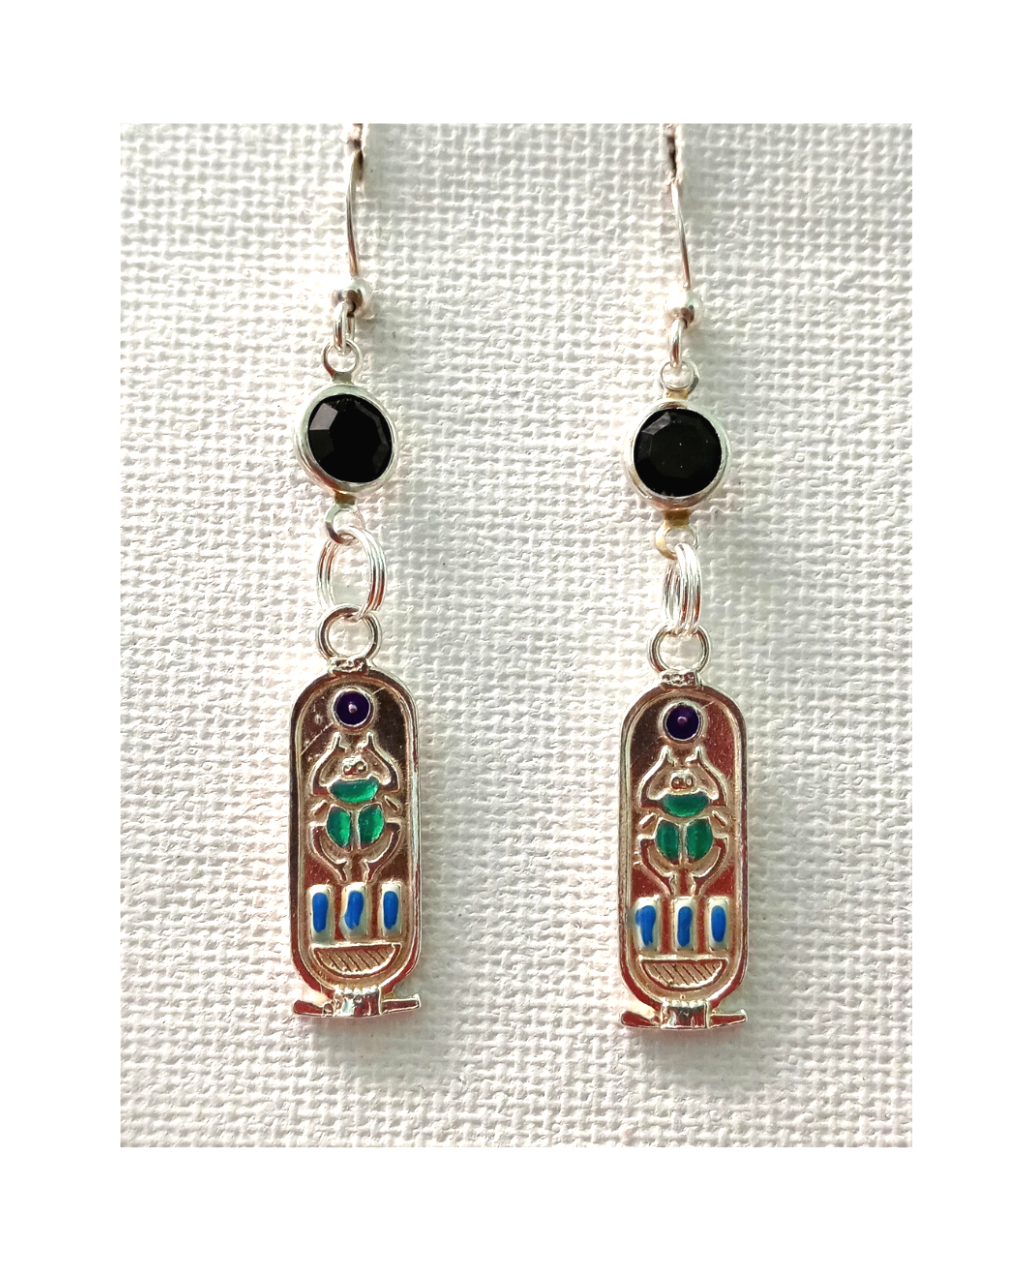 Exclusive Hand-enameled Green Egyptian Scarab Cartouche Design with Swarovski Crystal Sterling Earrings